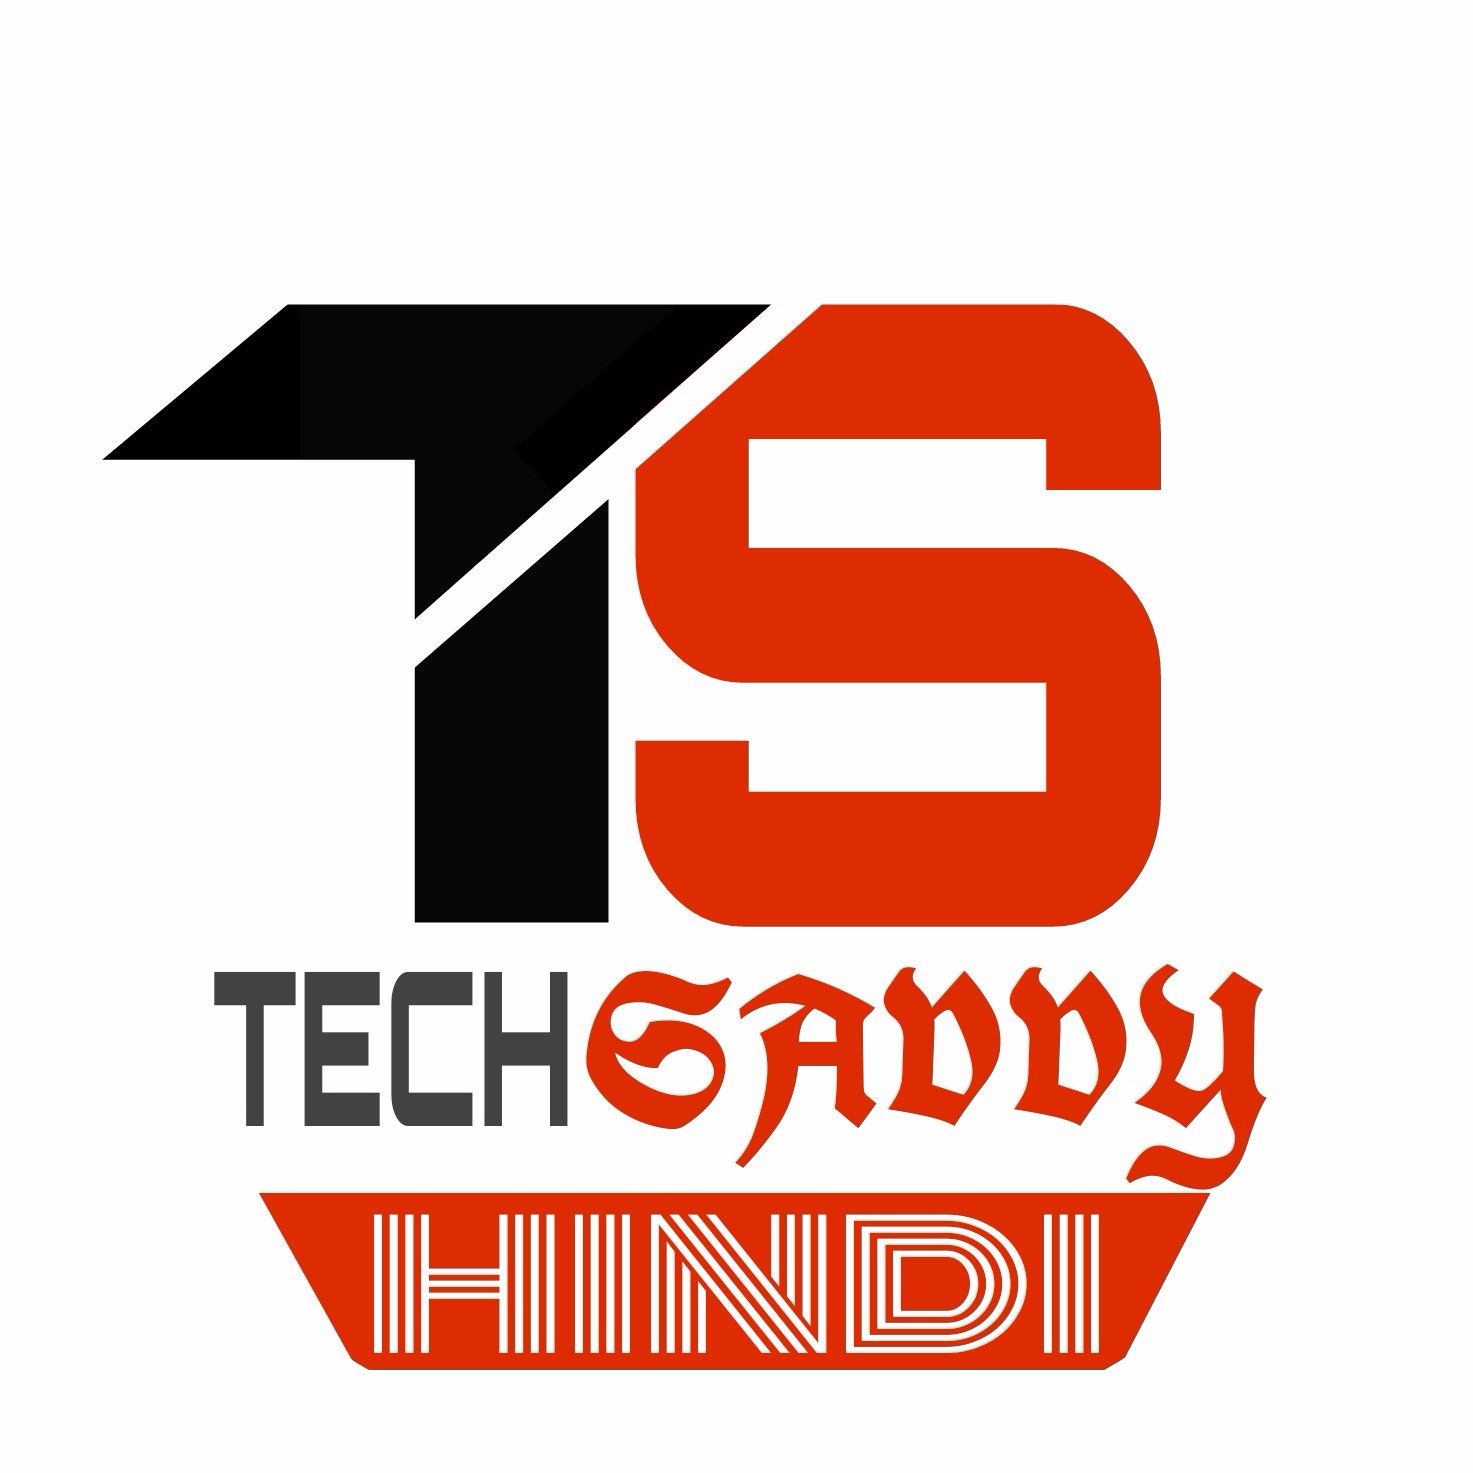 TechSavvy is YouTube channel where you will find all latest Technology Information in HINDI like facebook, youtube, social media and another intersting Stuff.